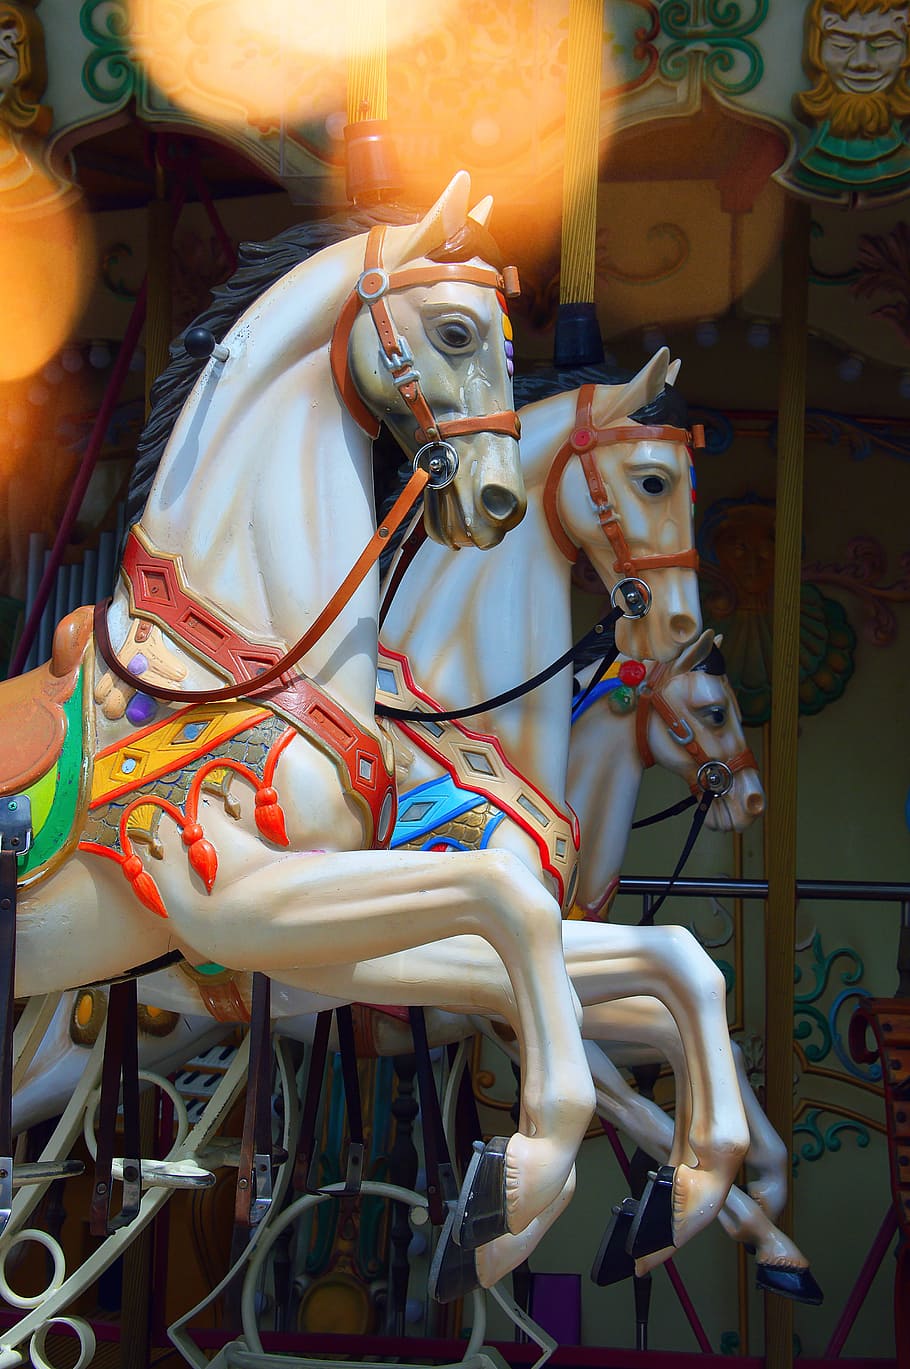 rocking horse, game, old, stylish, horses, plastic toy, carousel, HD wallpaper